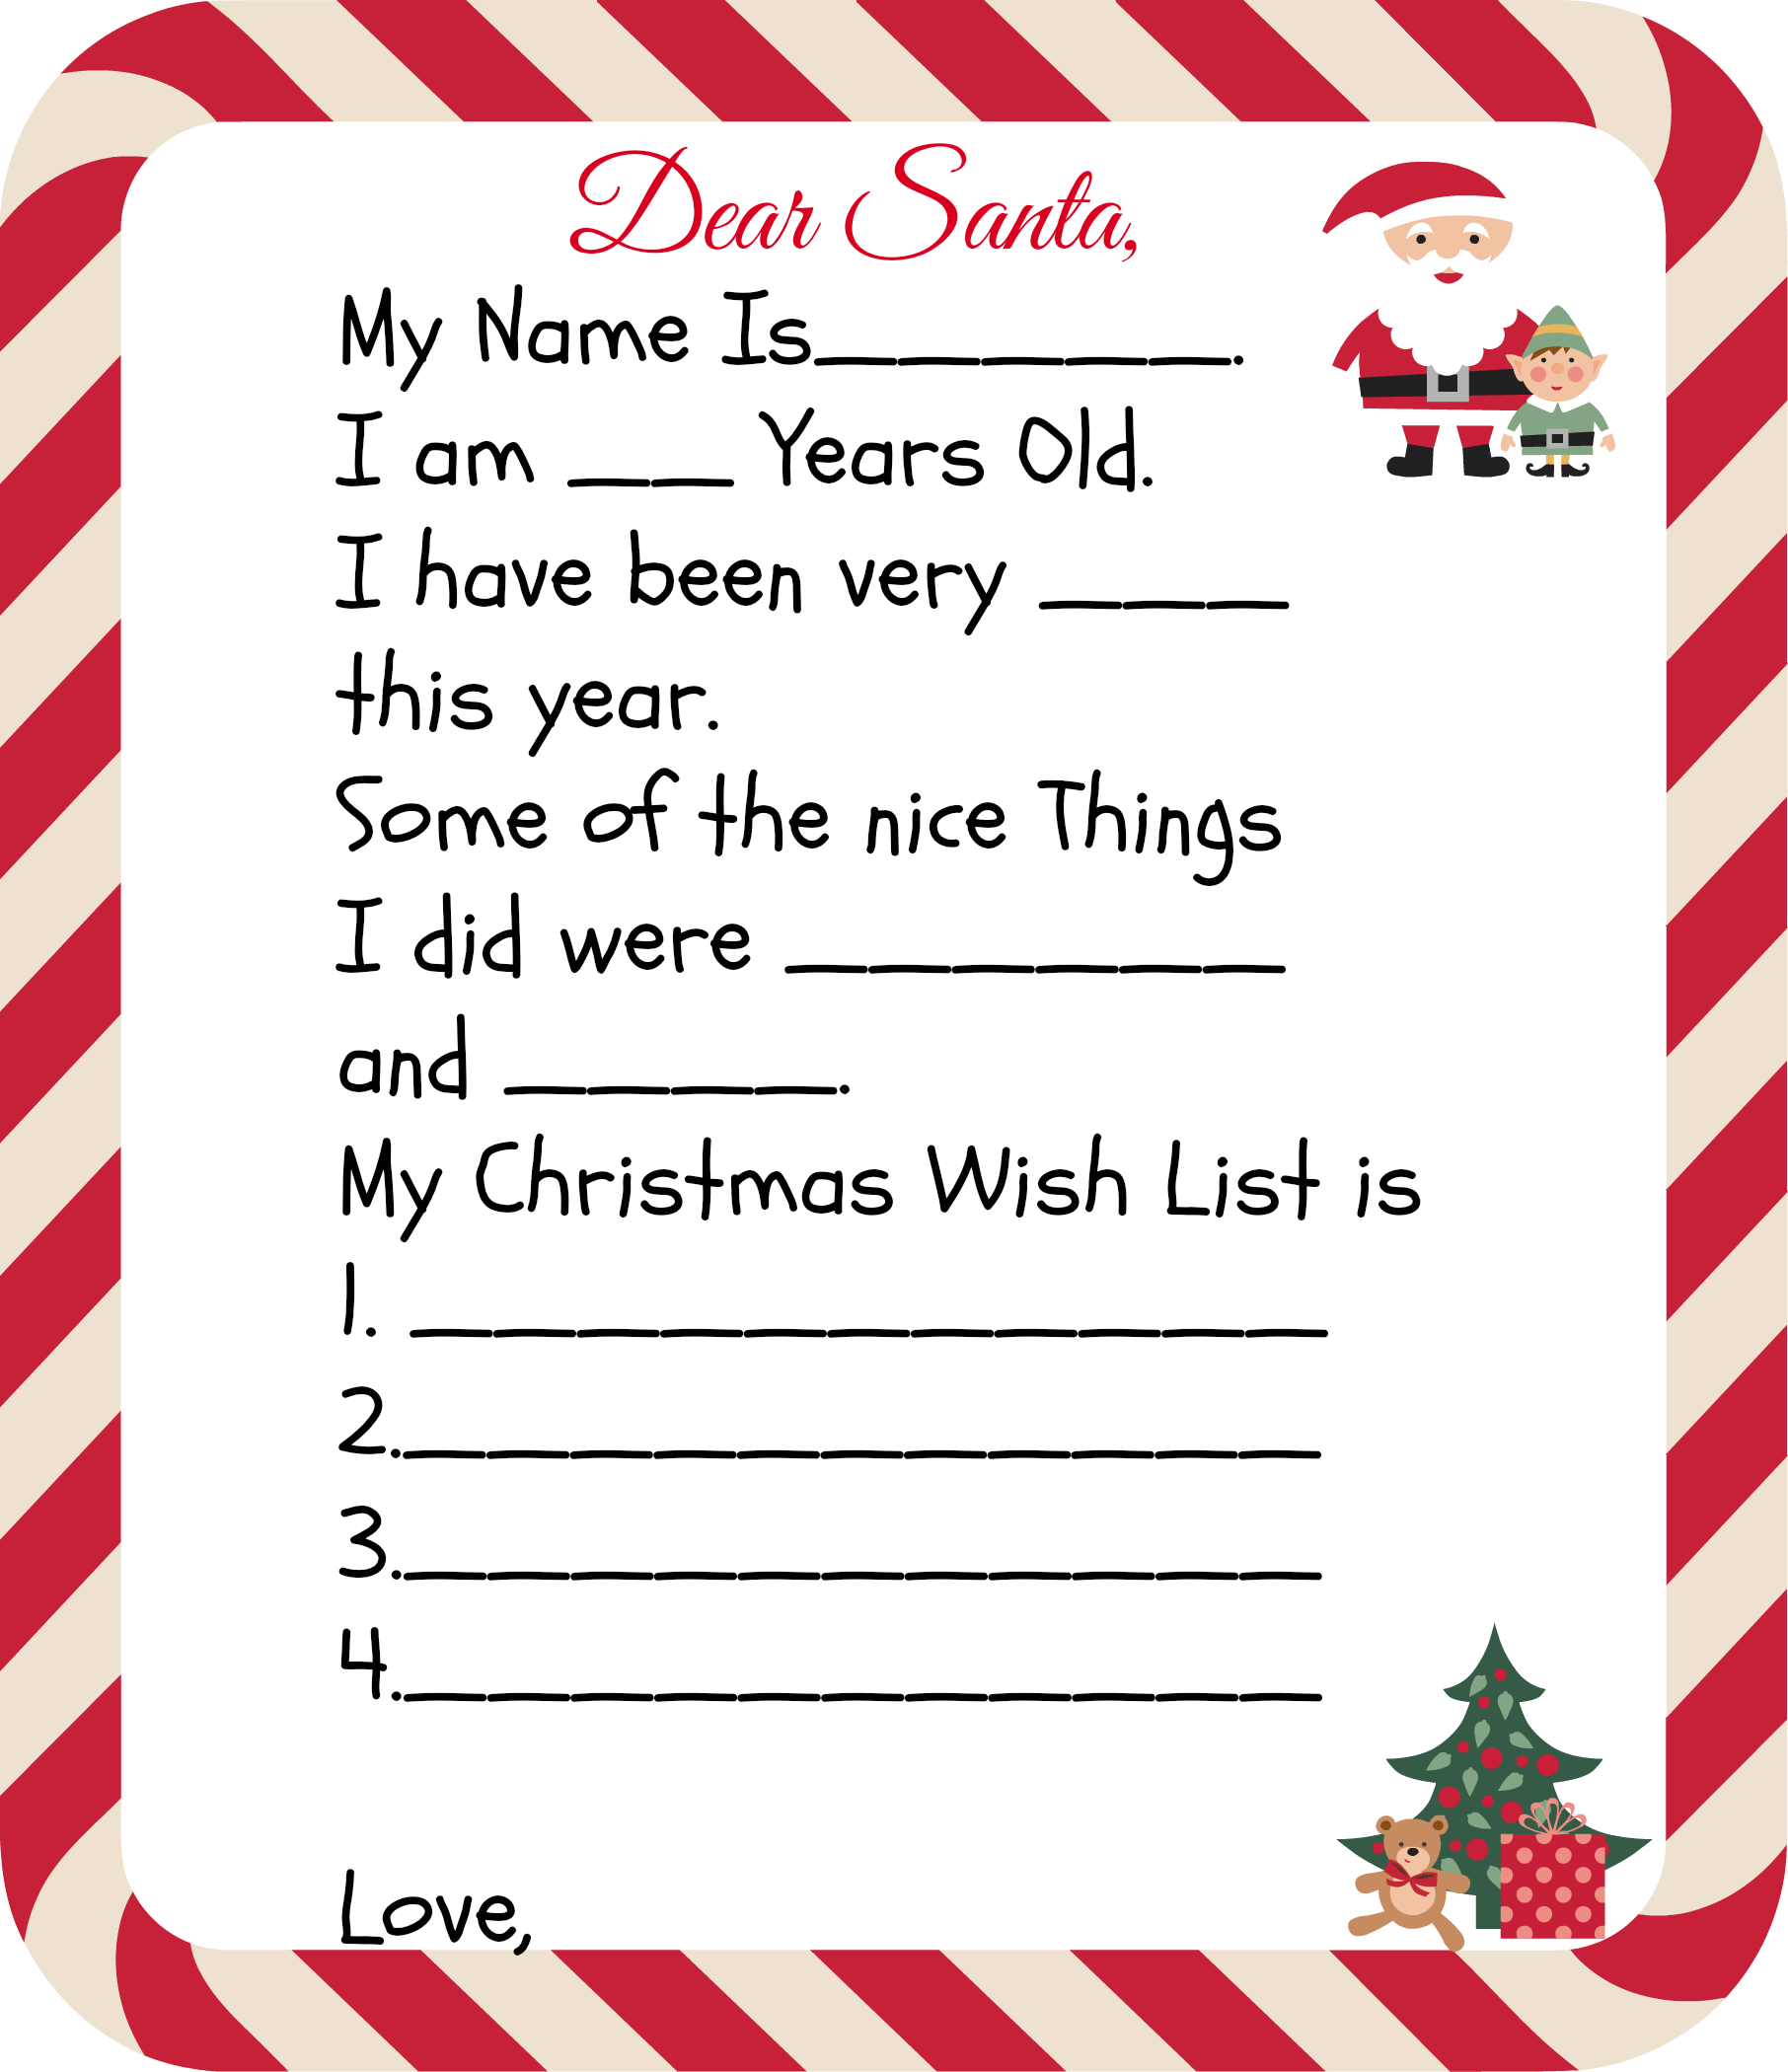 easy-free-letters-from-santa-customize-your-text-and-design-and-create-a-unique-santa-letter